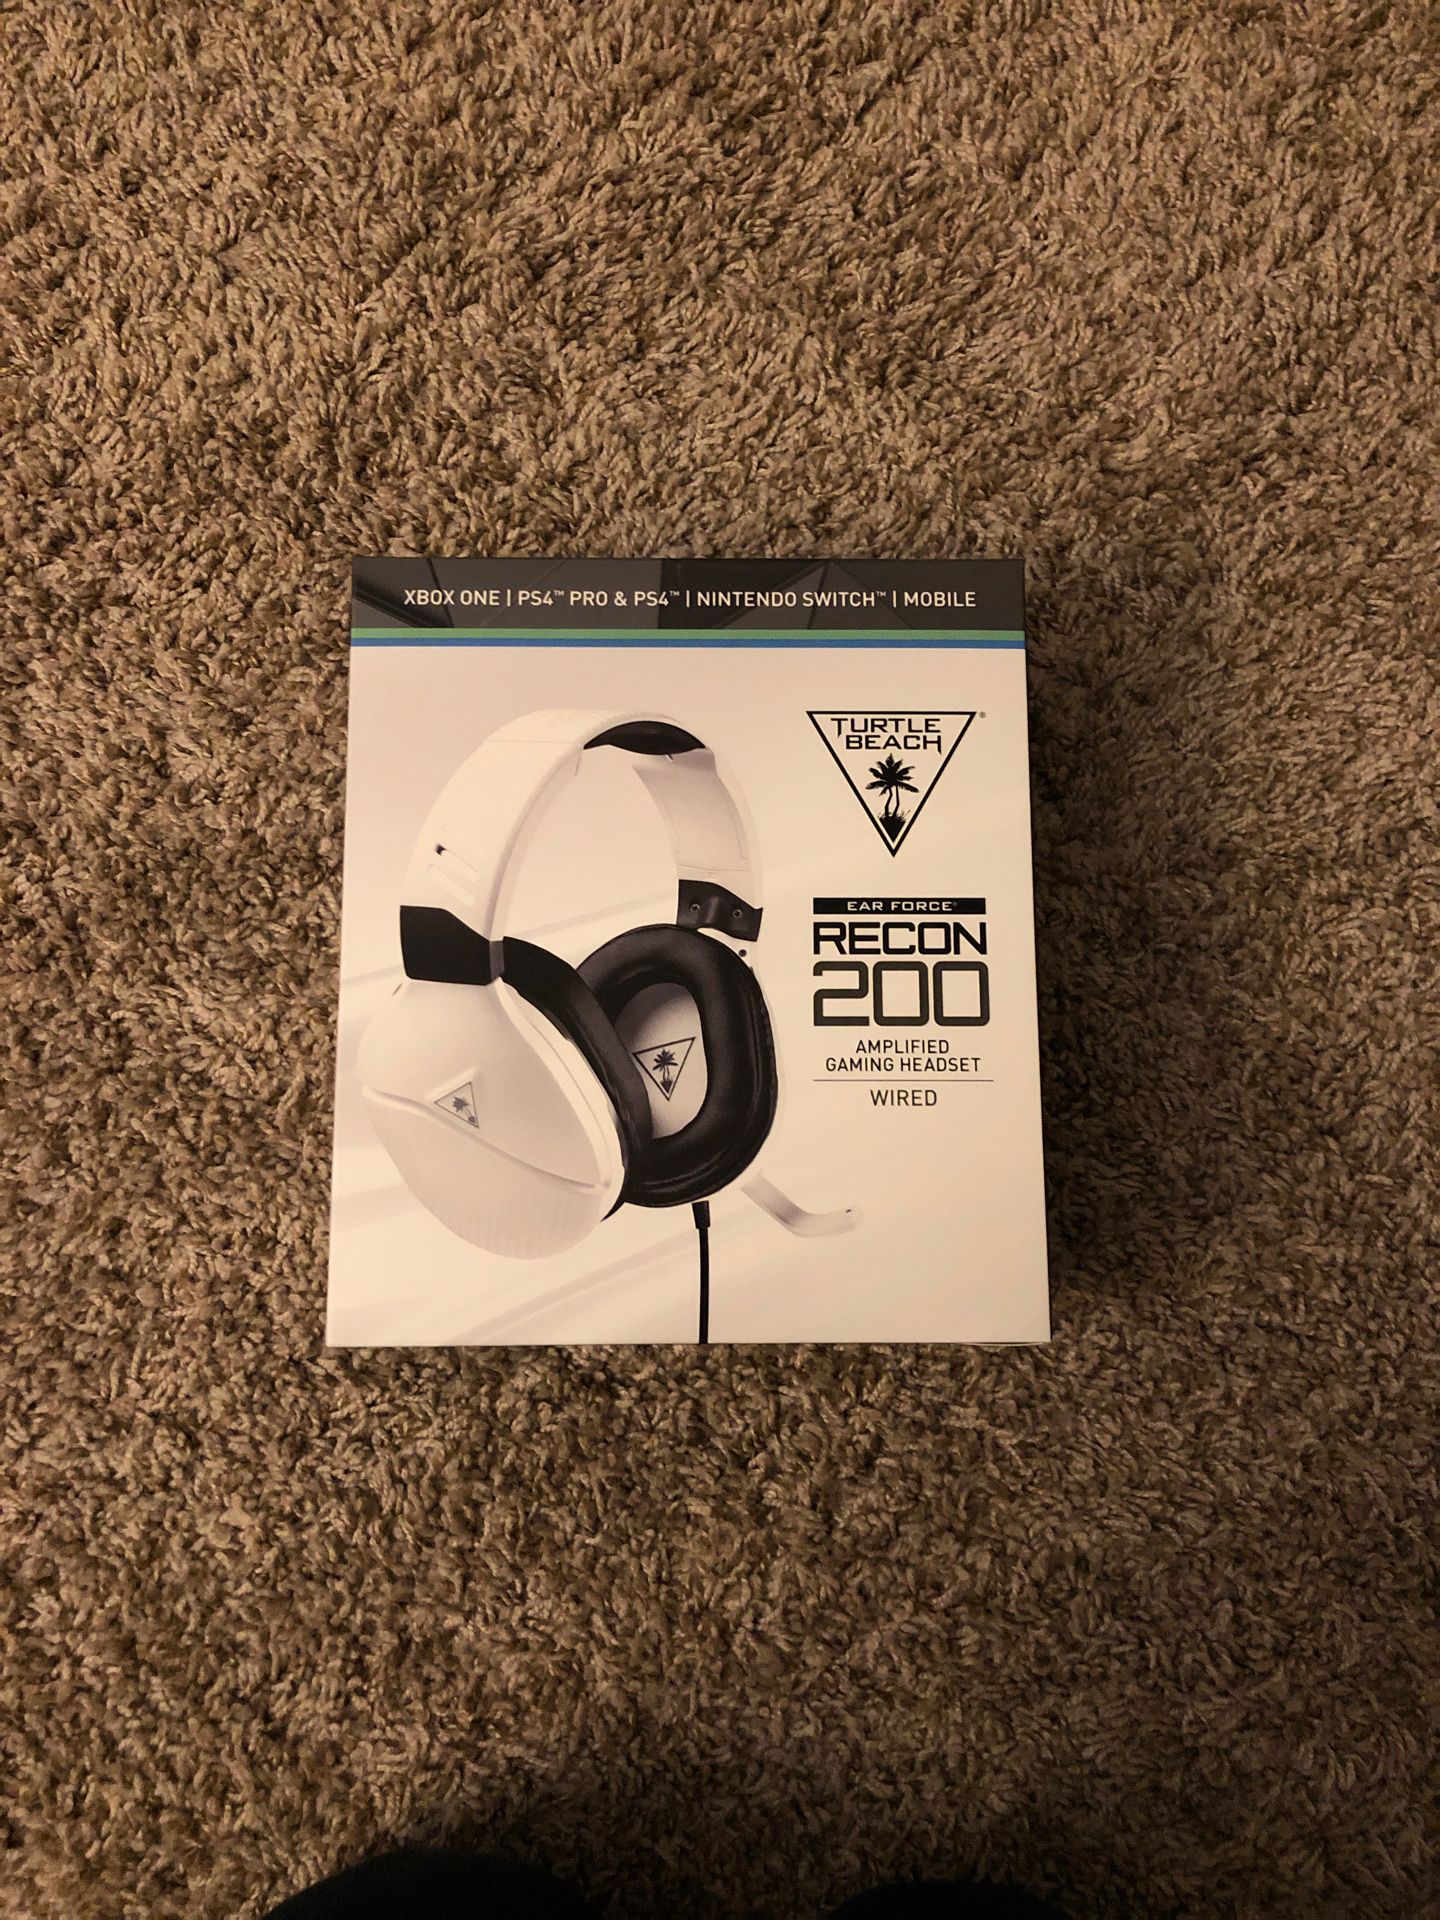 Turtle Beach Recon 200 gaming headset